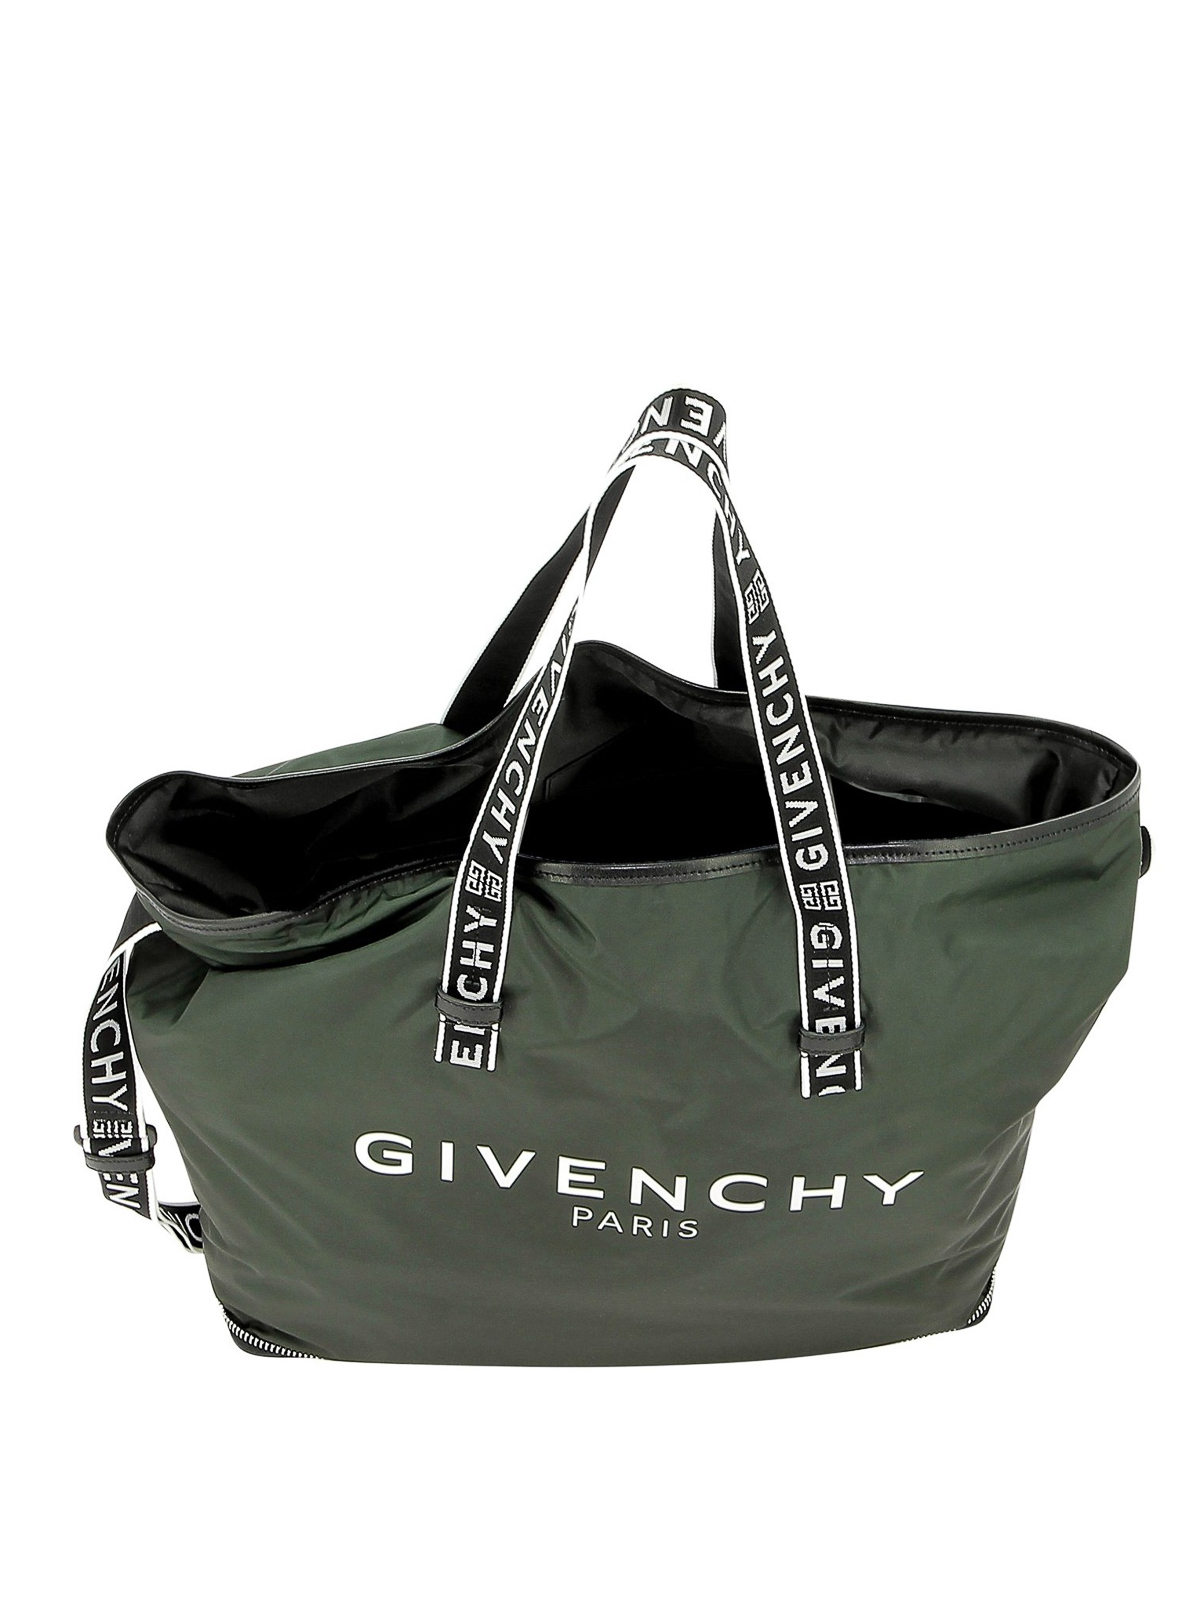 Buy Givenchy Bags  Handbags online  Women  223 products  FASHIOLAin